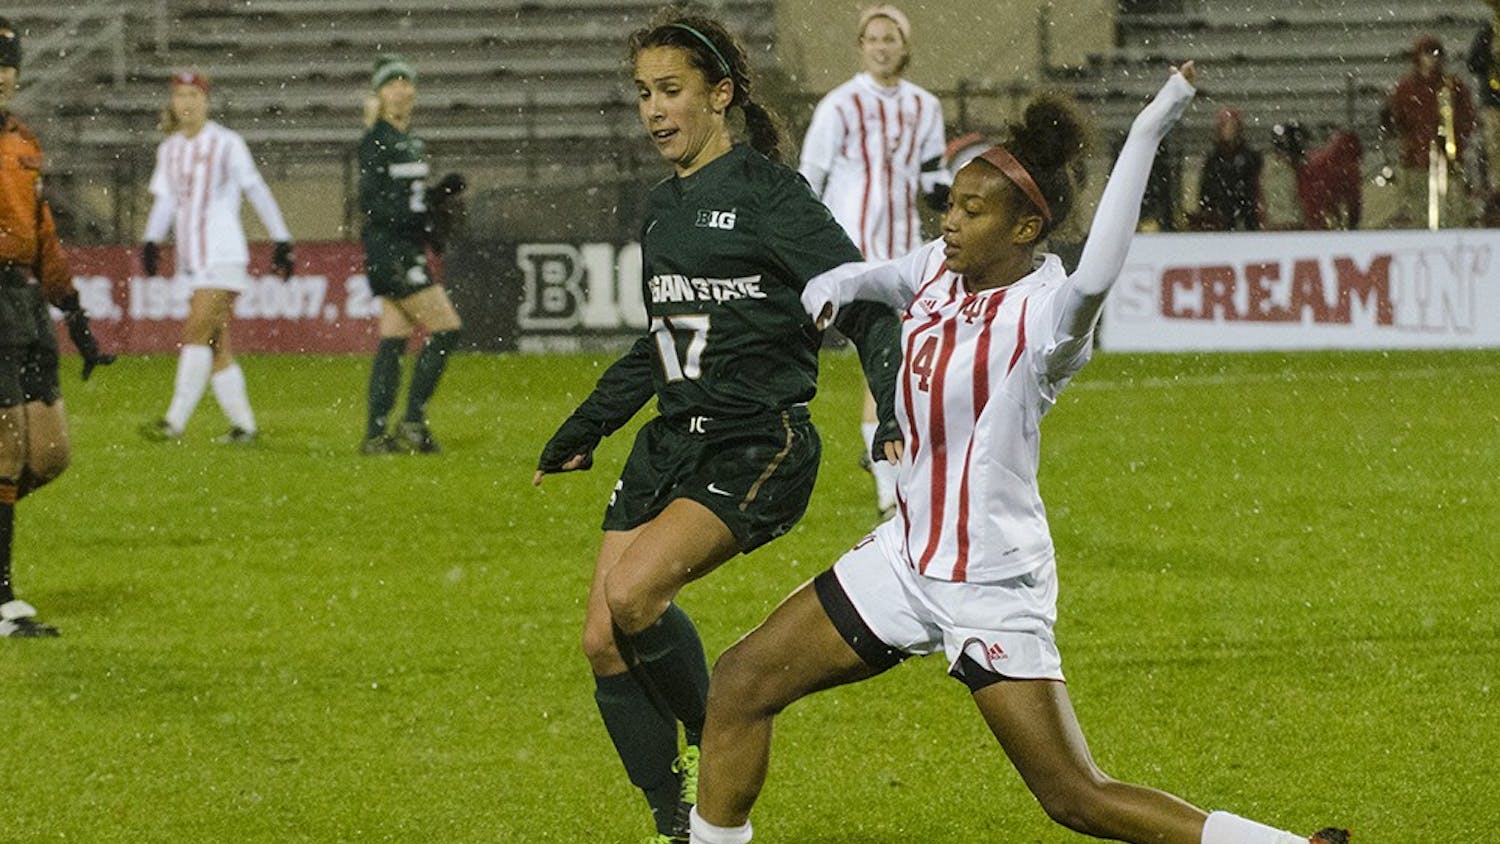 Freshman defender Mykayla Brown breaks up a pass intended for Michigan State midfielder Sarah Kovan during the Hoosier's final game of the season friday night. IU won 2-0 and finsihed its season 7-11-1.